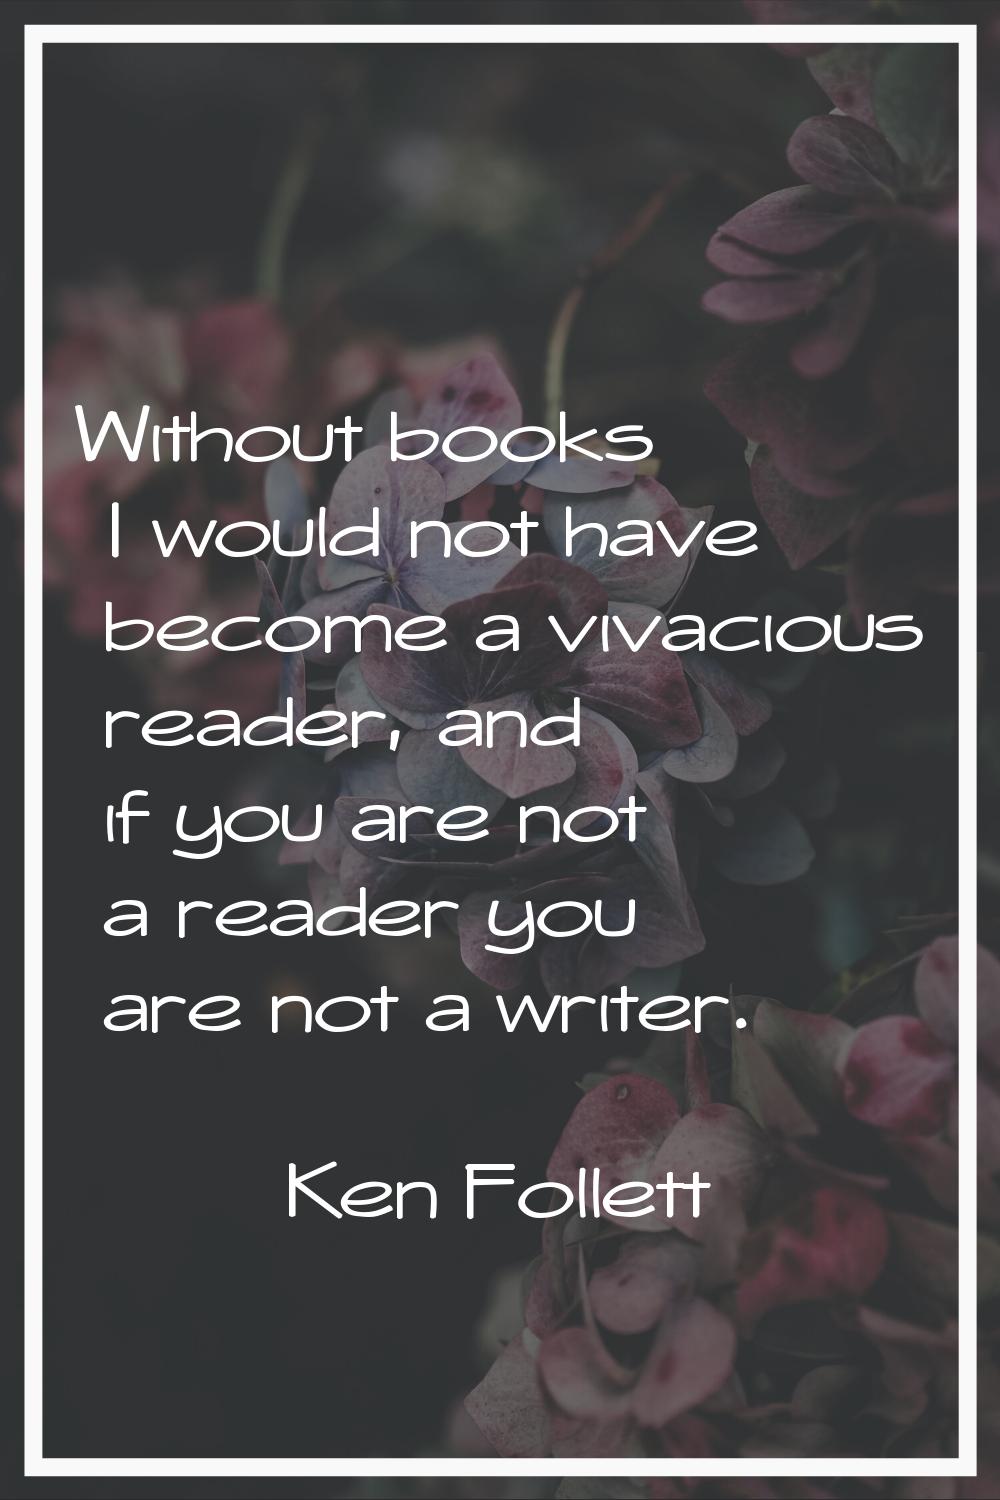 Without books I would not have become a vivacious reader, and if you are not a reader you are not a